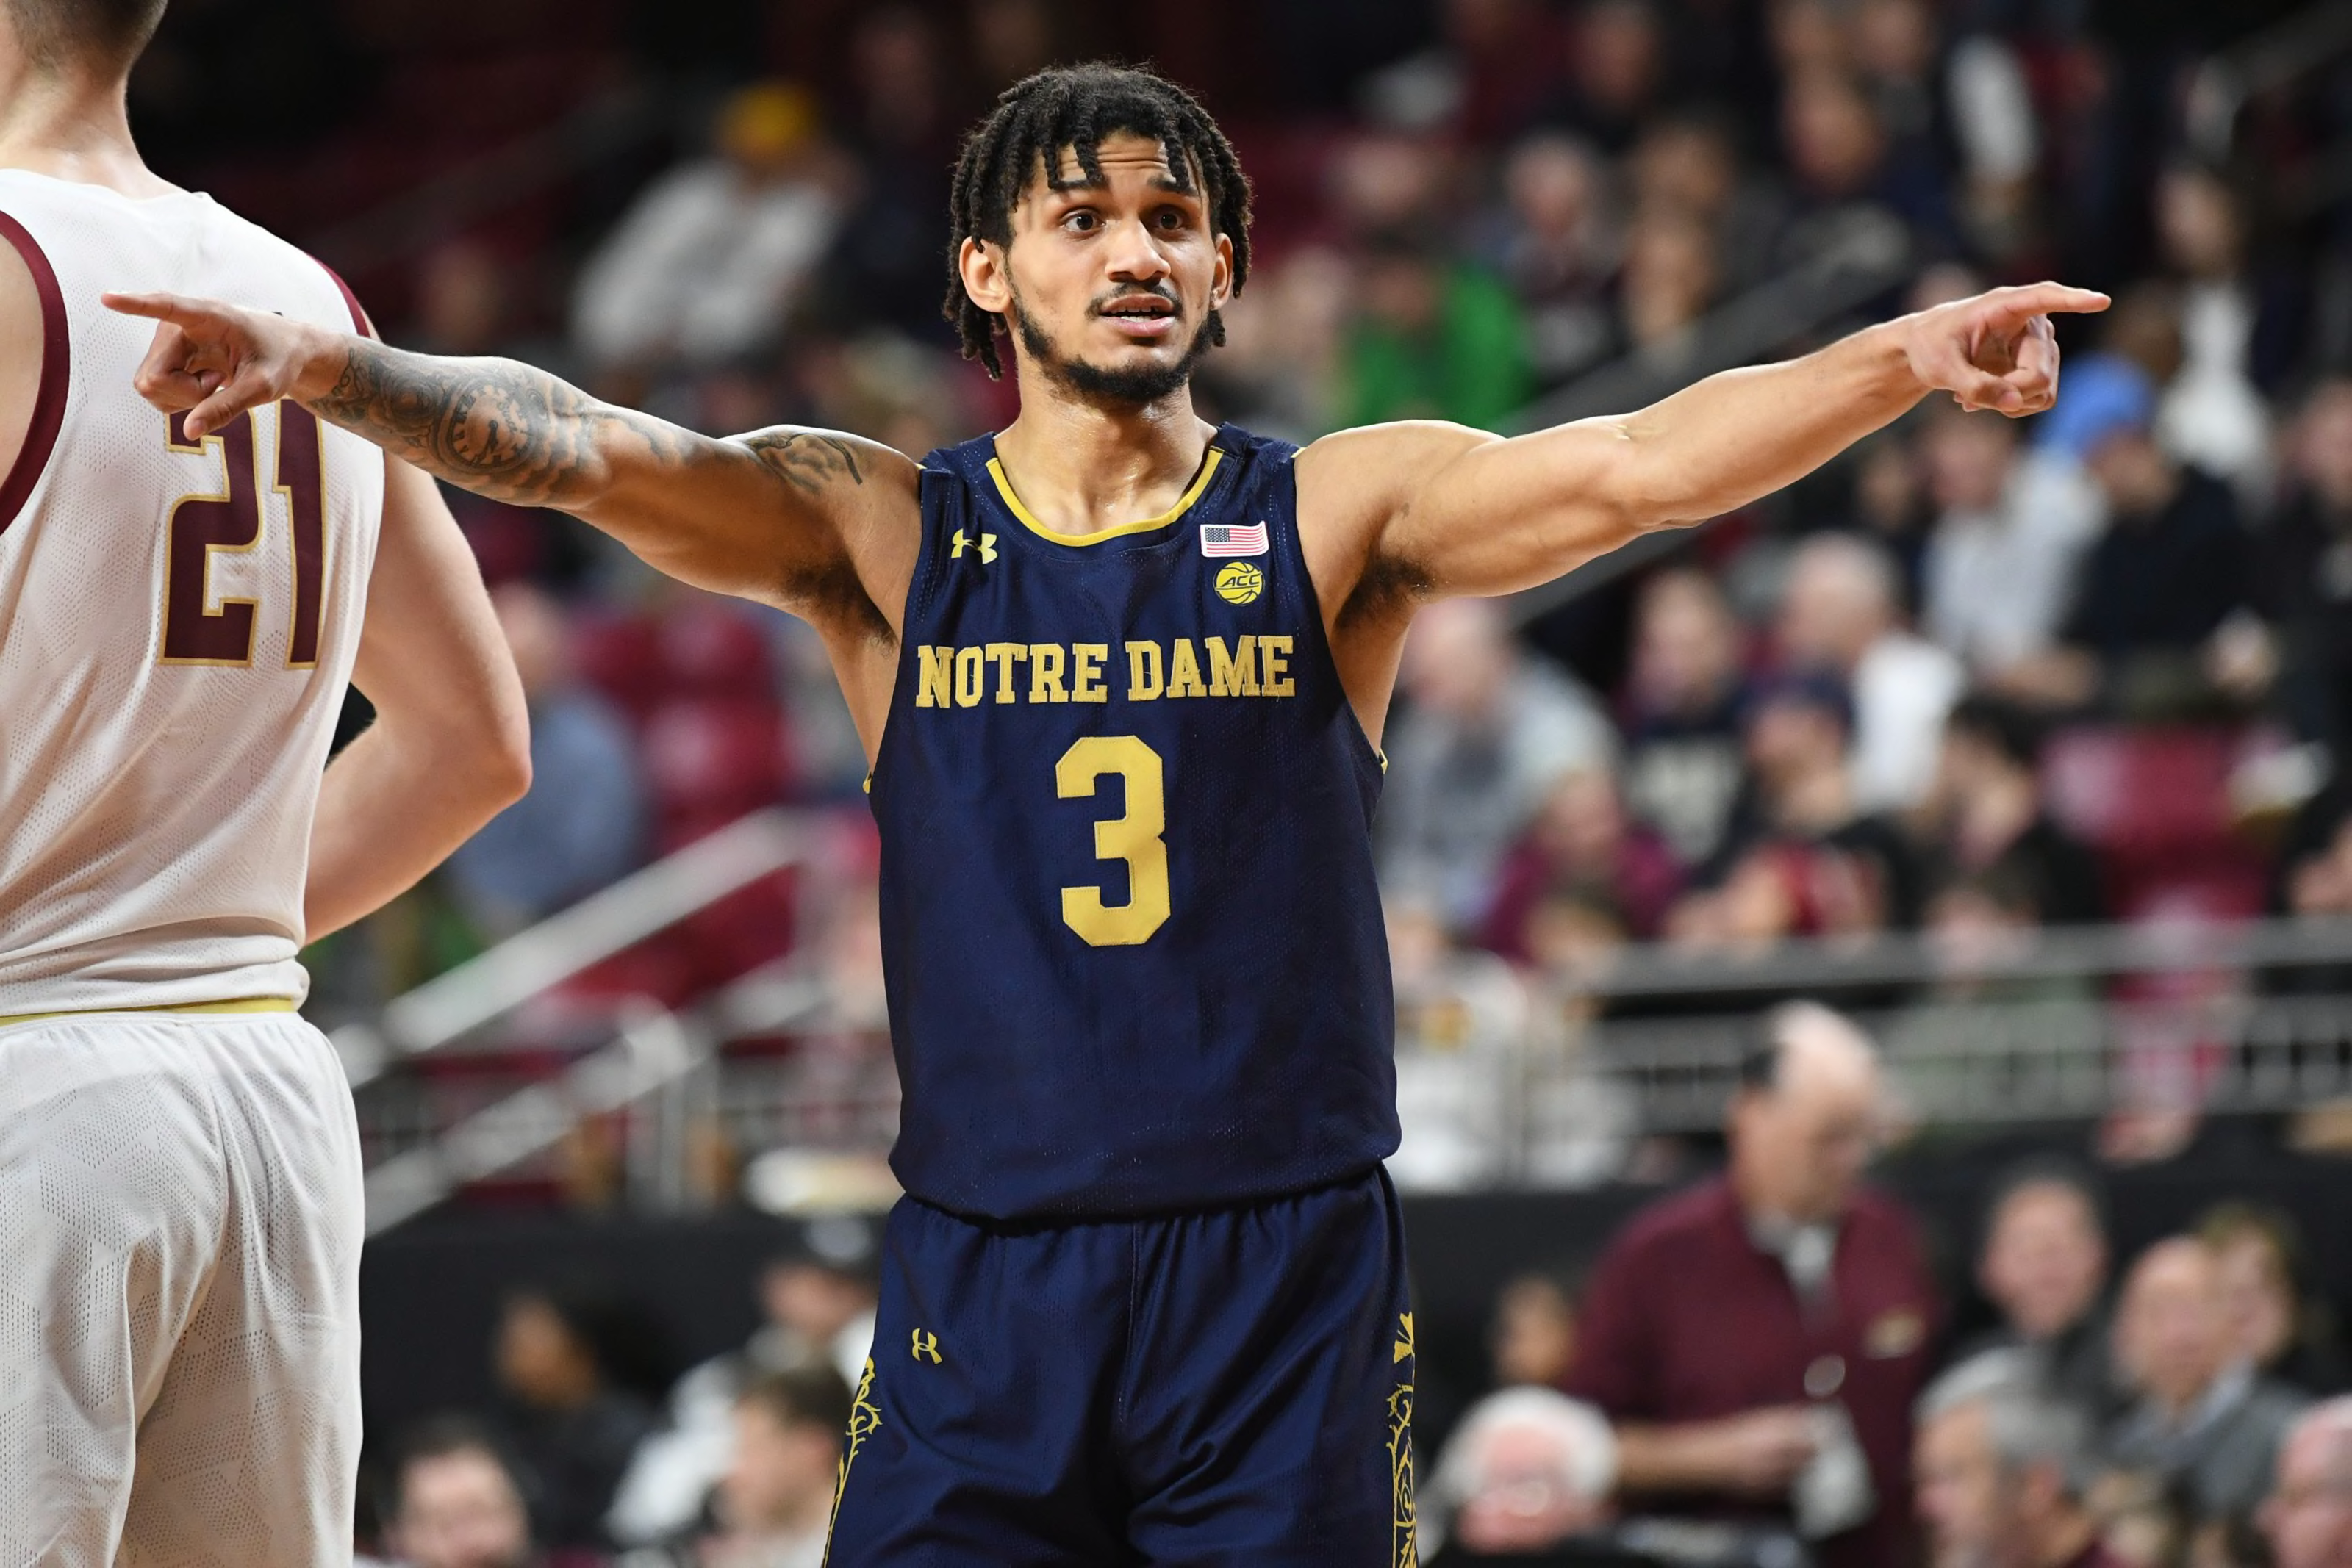 Notre Dame Men's Basketball 3 things we learned in win over Miami